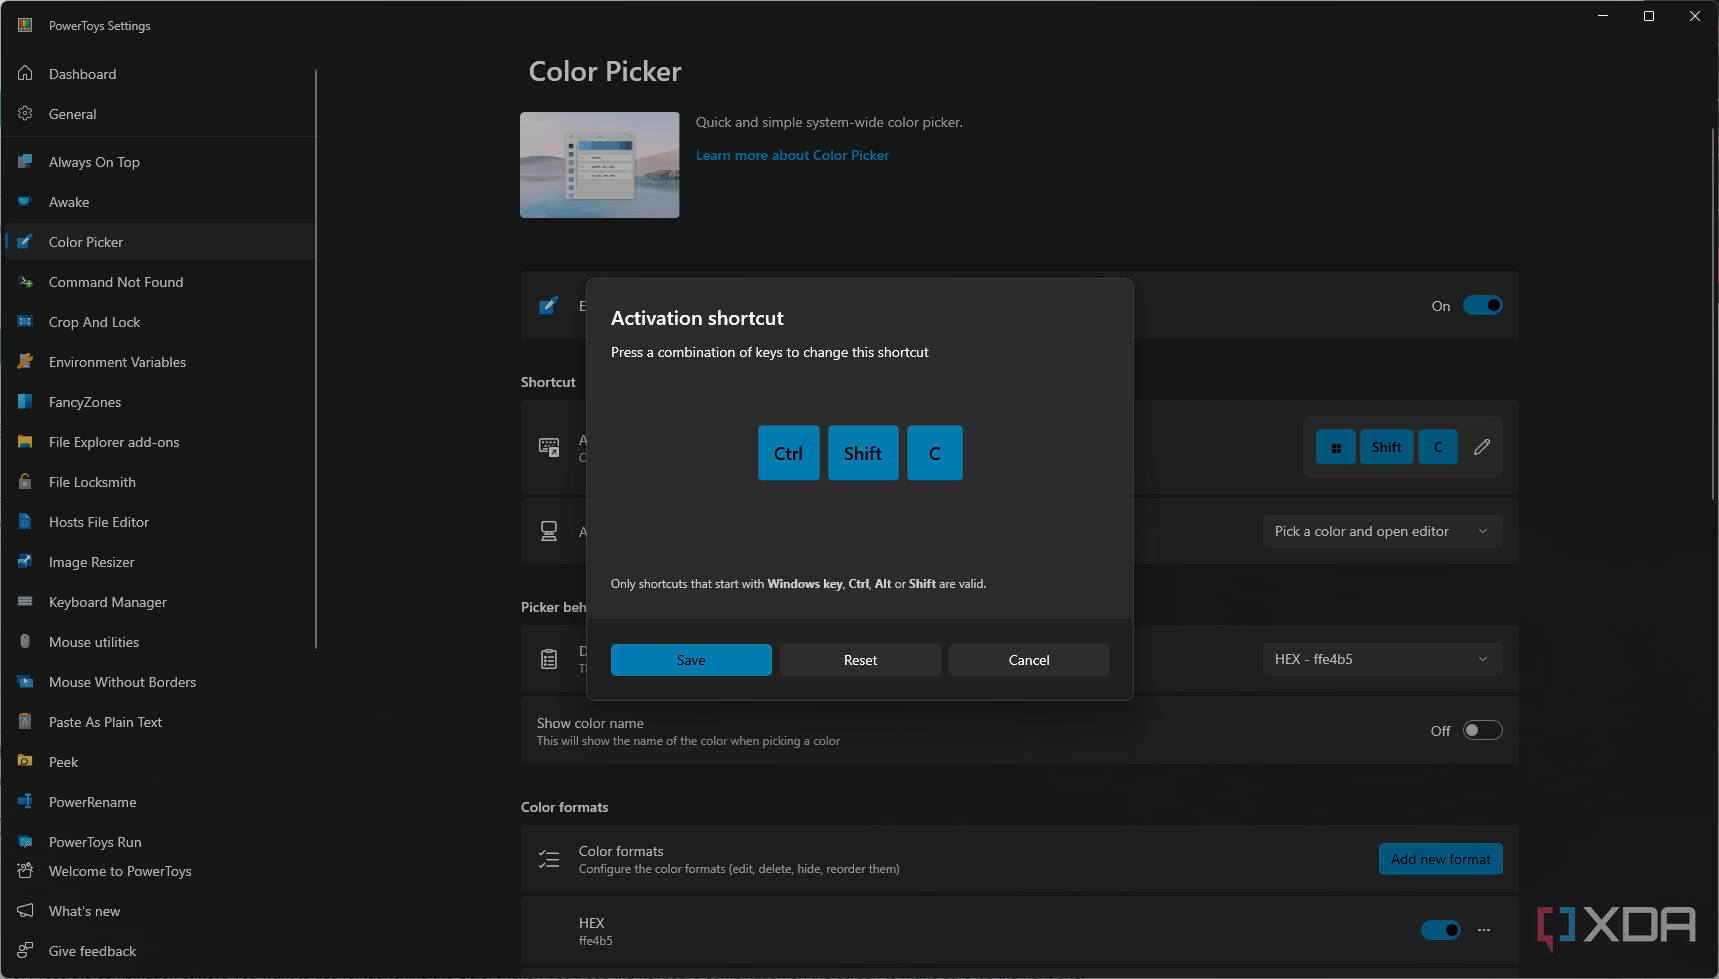 Screenshot of theactivation shortcut preview for Color Picker in PowerToys